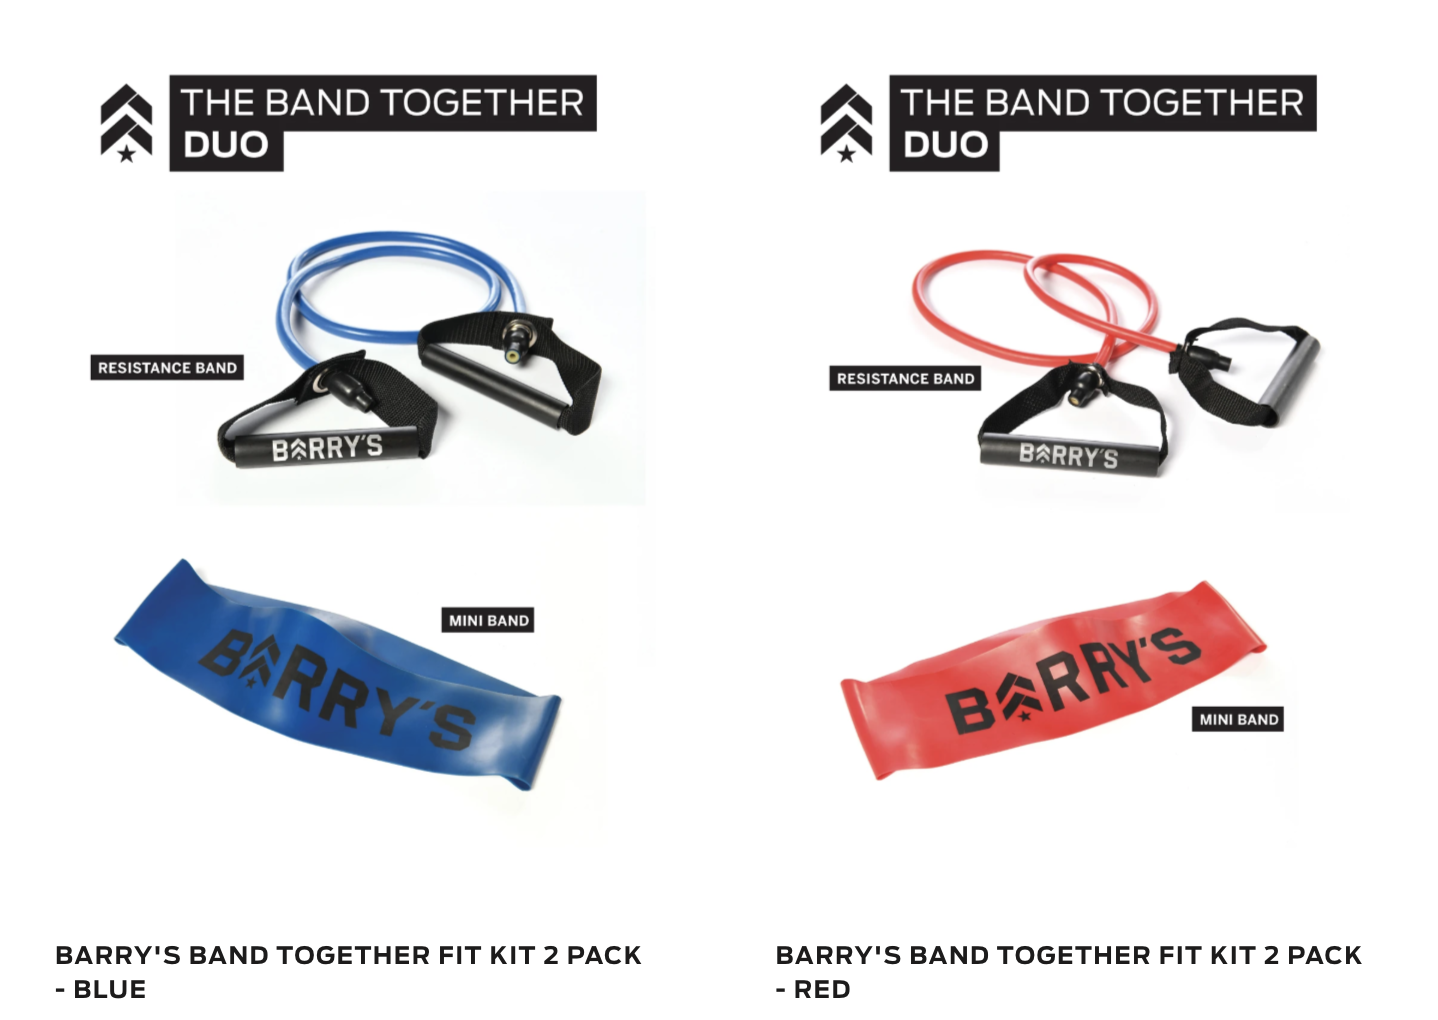 Barry’s At Home band kits.